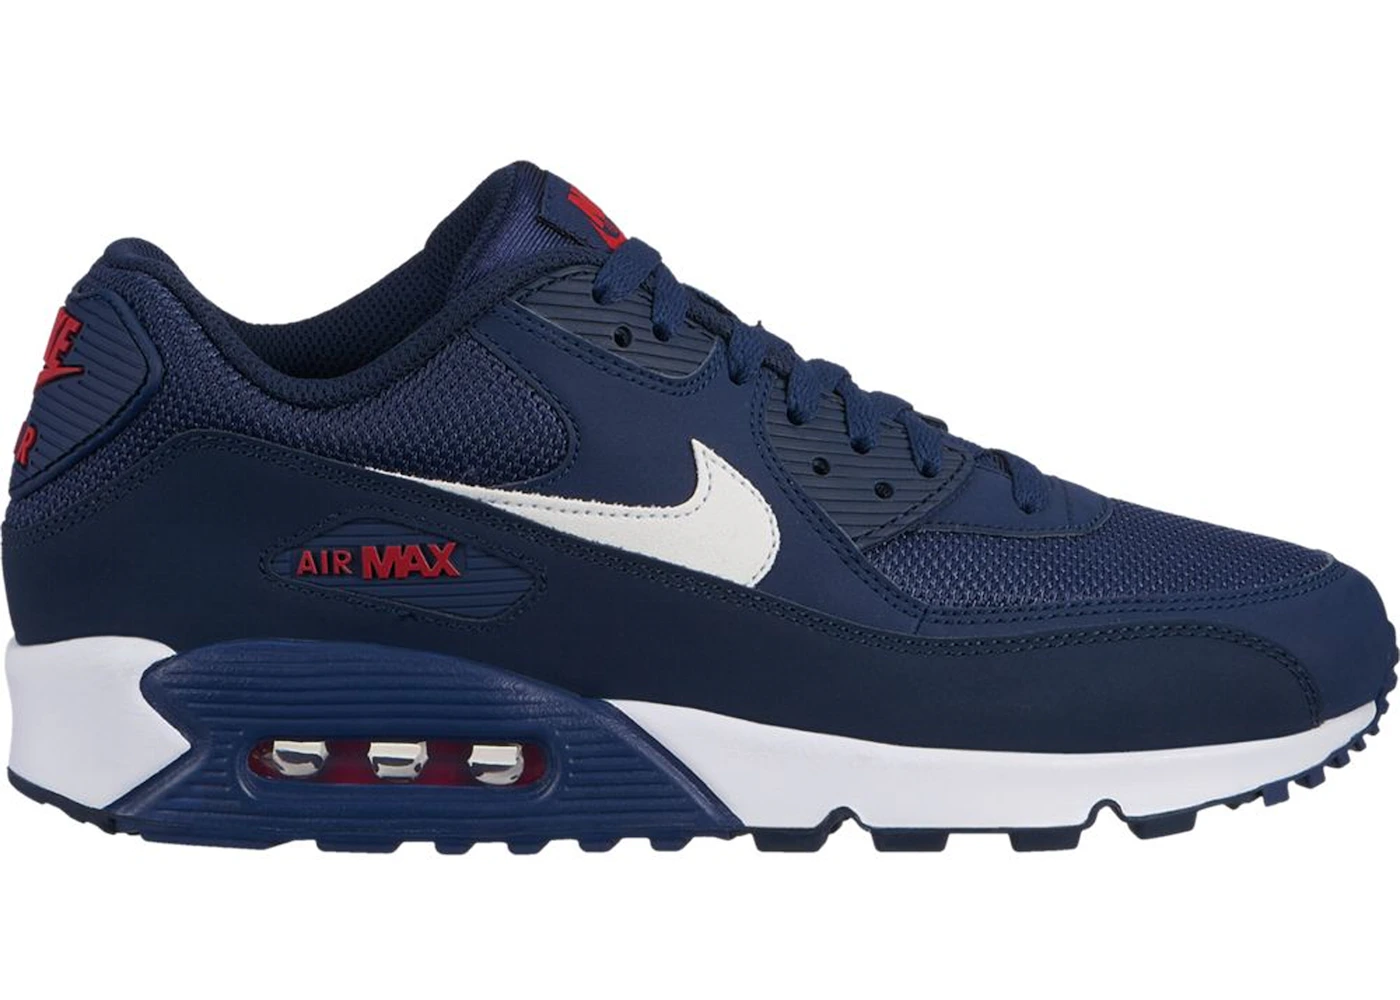 Hecho para recordar sin cable autobús Nike Air Max 90 Midnight Navy University Red White Men's - AJ1285-403 - US